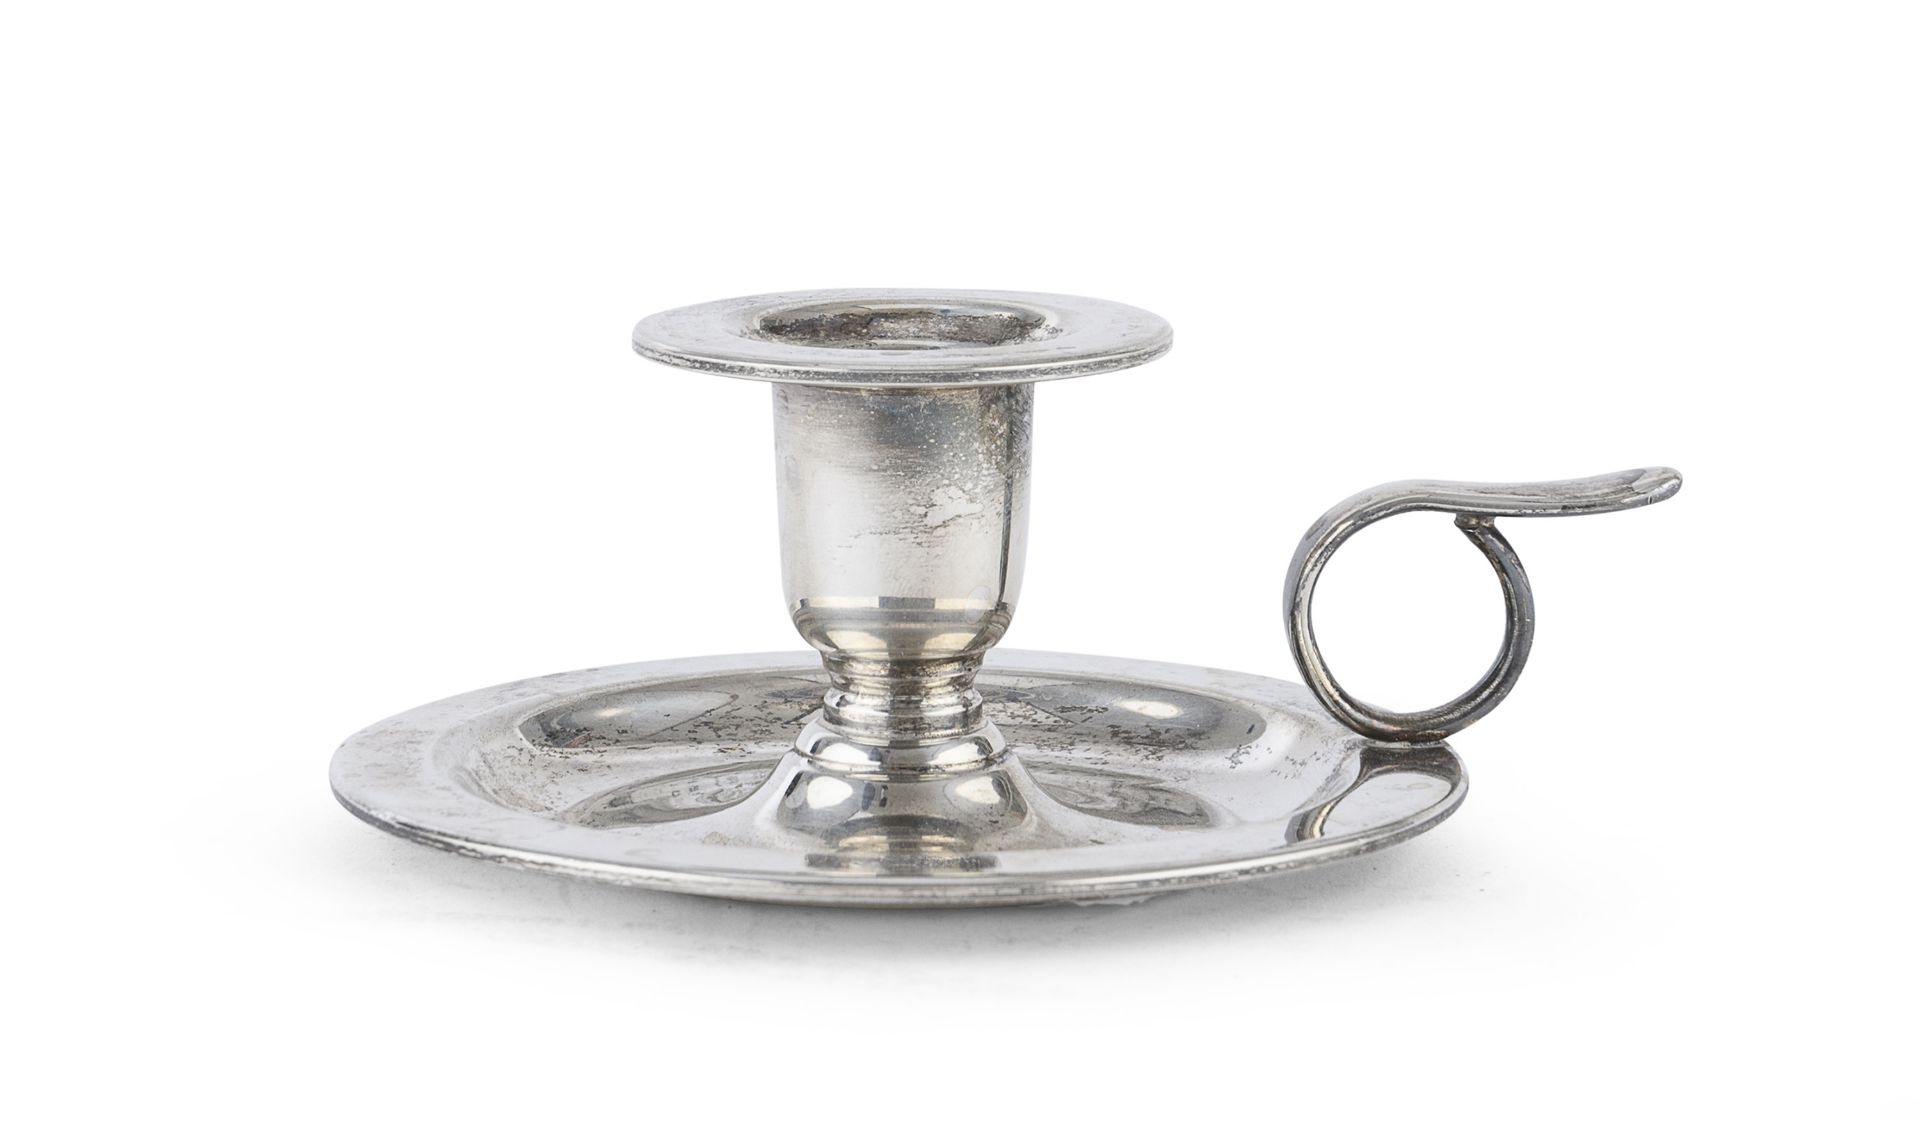 SILVER-PLATED CANDLE HOLDER ITALY 20TH CENTURY